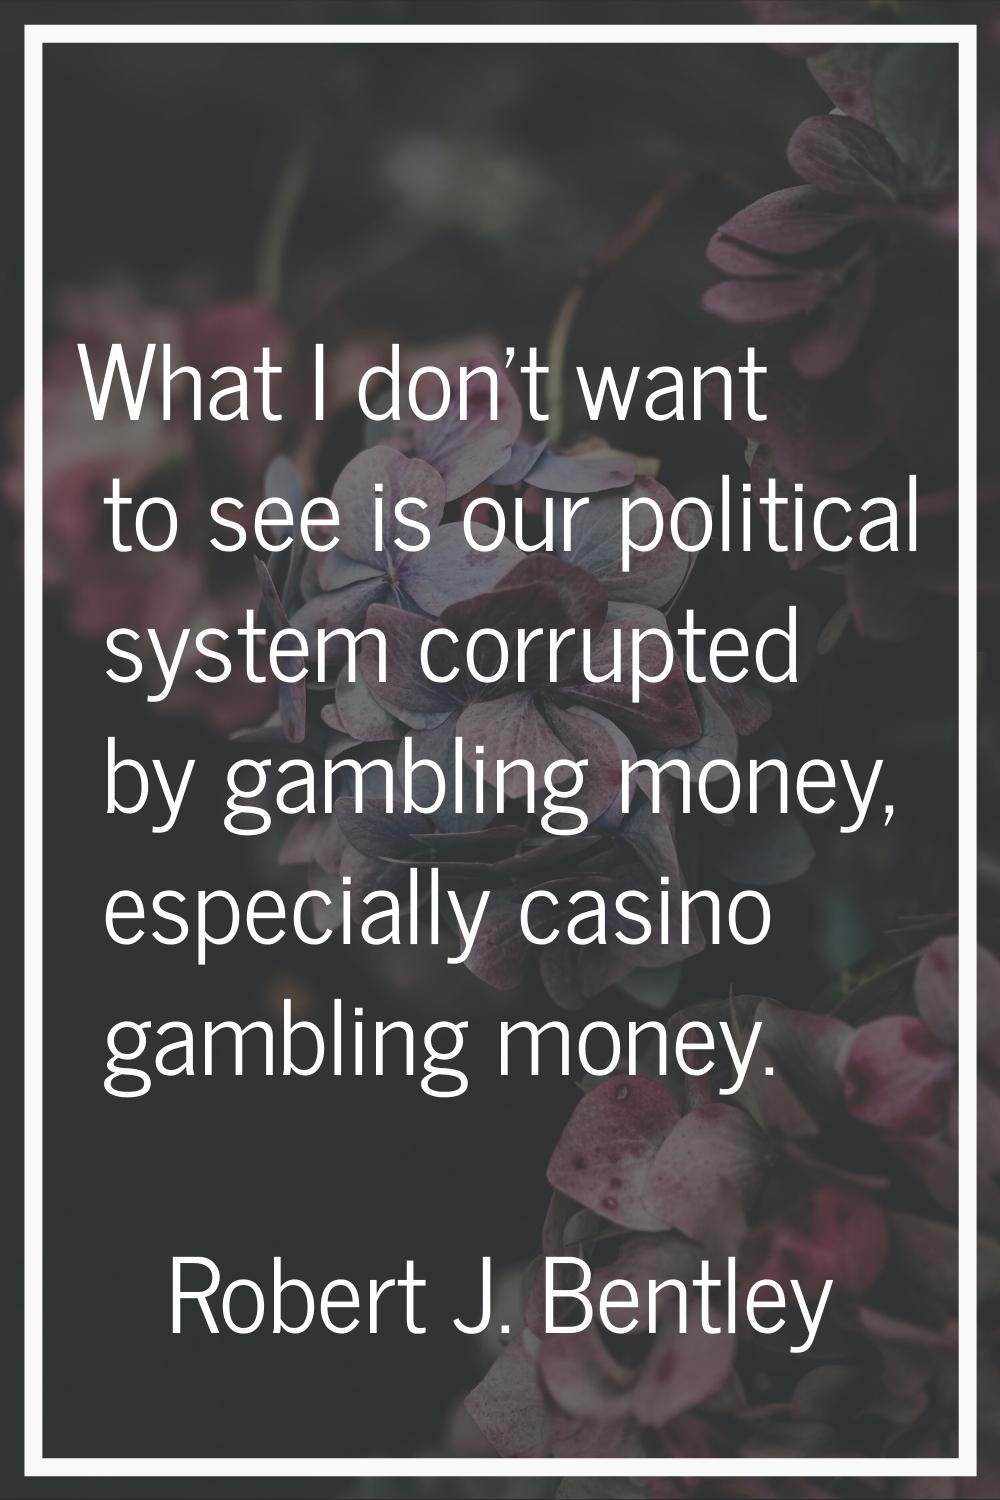 What I don't want to see is our political system corrupted by gambling money, especially casino gam